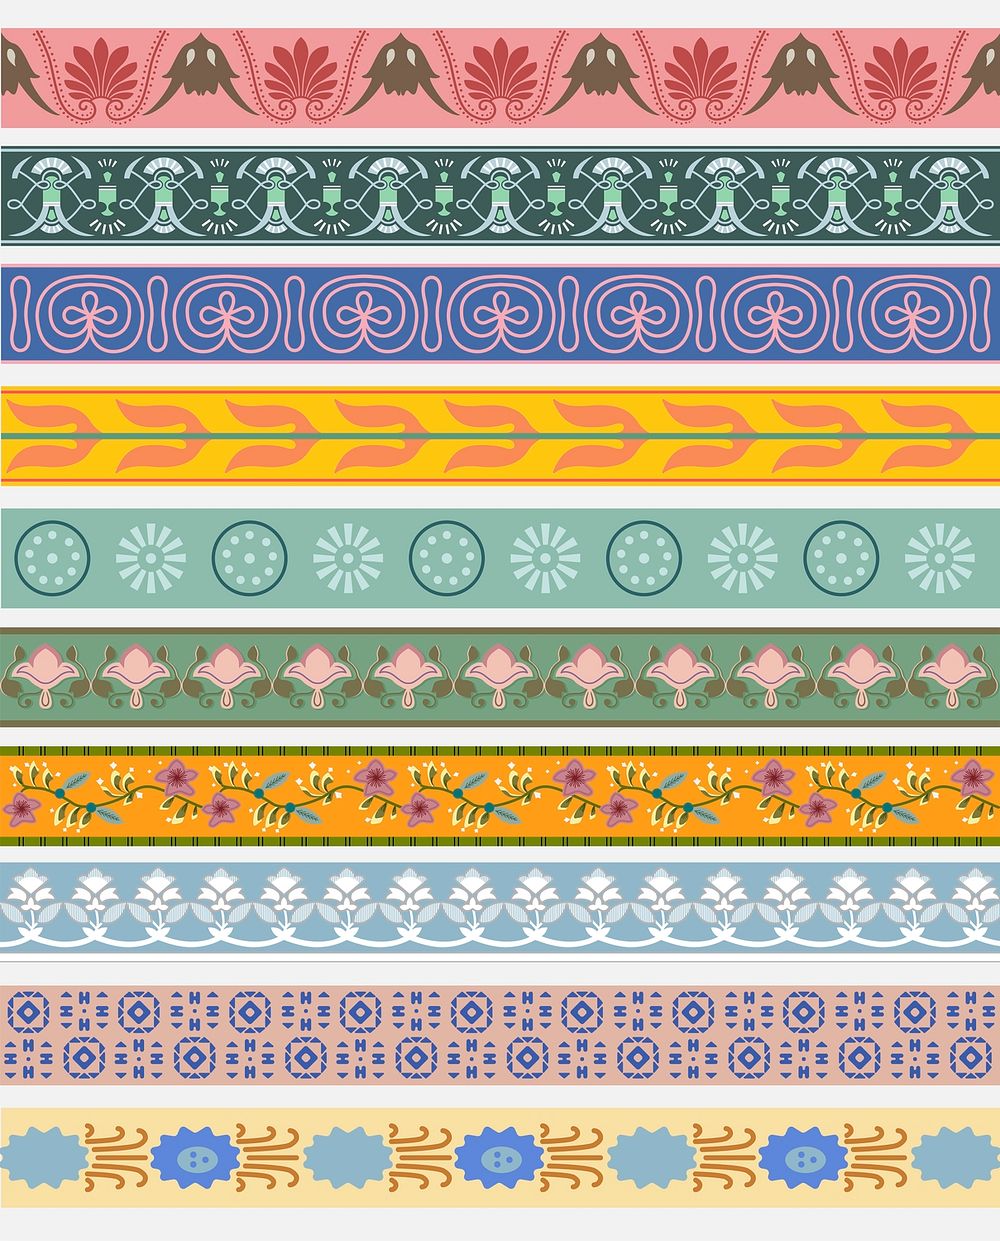 Vintage patterns inspired by The Grammar of Ornament 